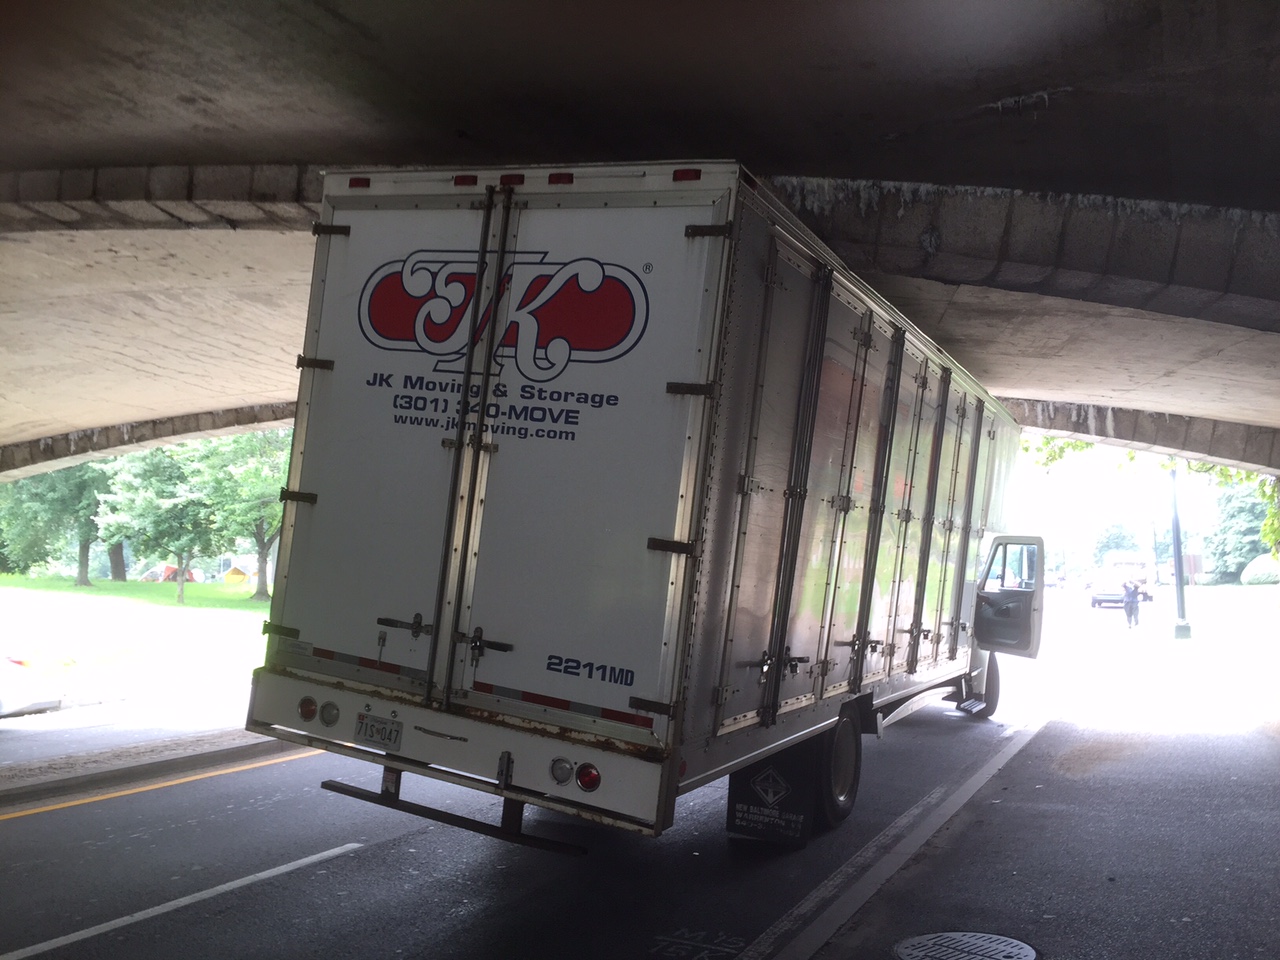 For the second time in a week, an over-height truck became lodged under a low-clearance bridge on the Rock Creek Parkway. (WTOP/Dave Dildine)